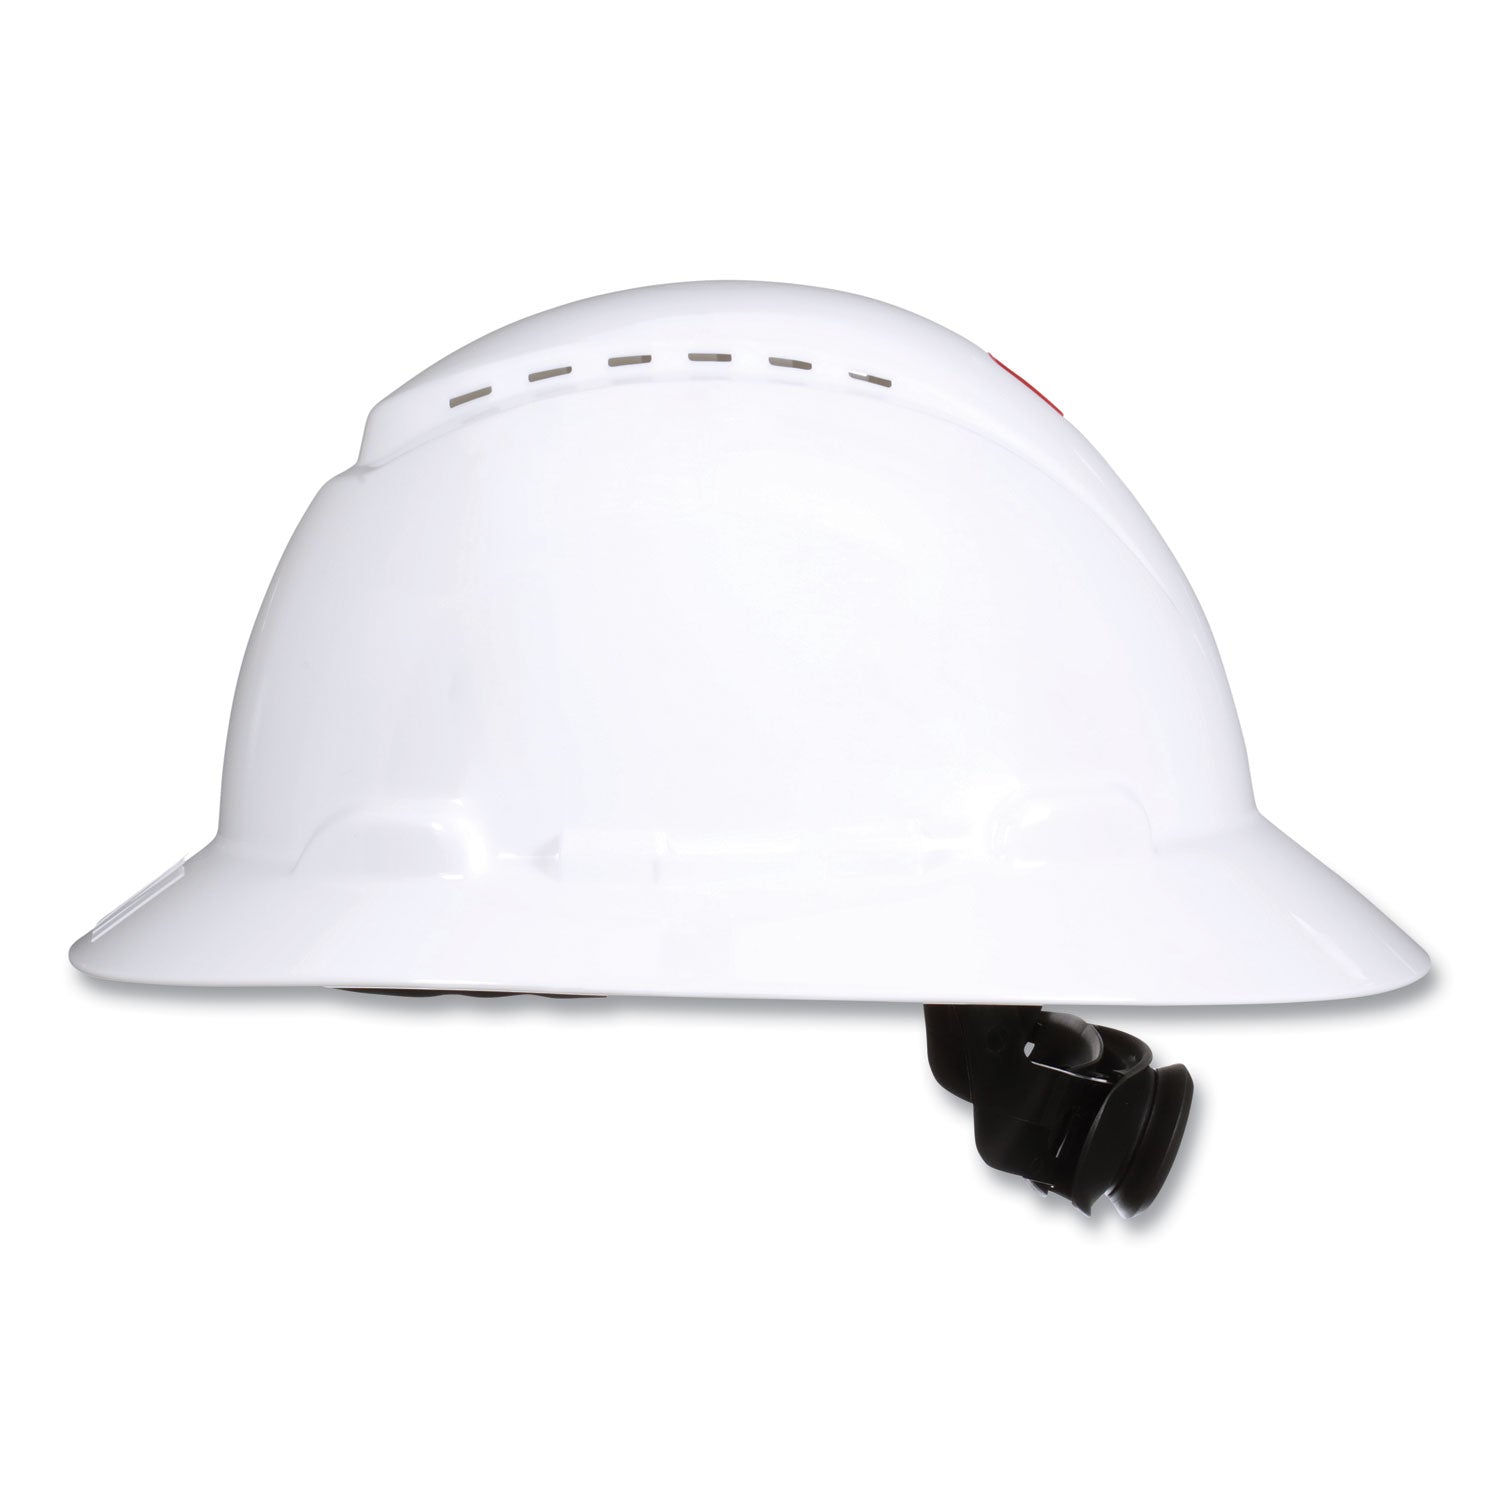 securefit-h-series-hard-hats-h-800-vented-hat-with-uv-indicator-4-point-pressure-diffusion-ratchet-suspension-white_mmmh801sfvuv - 4